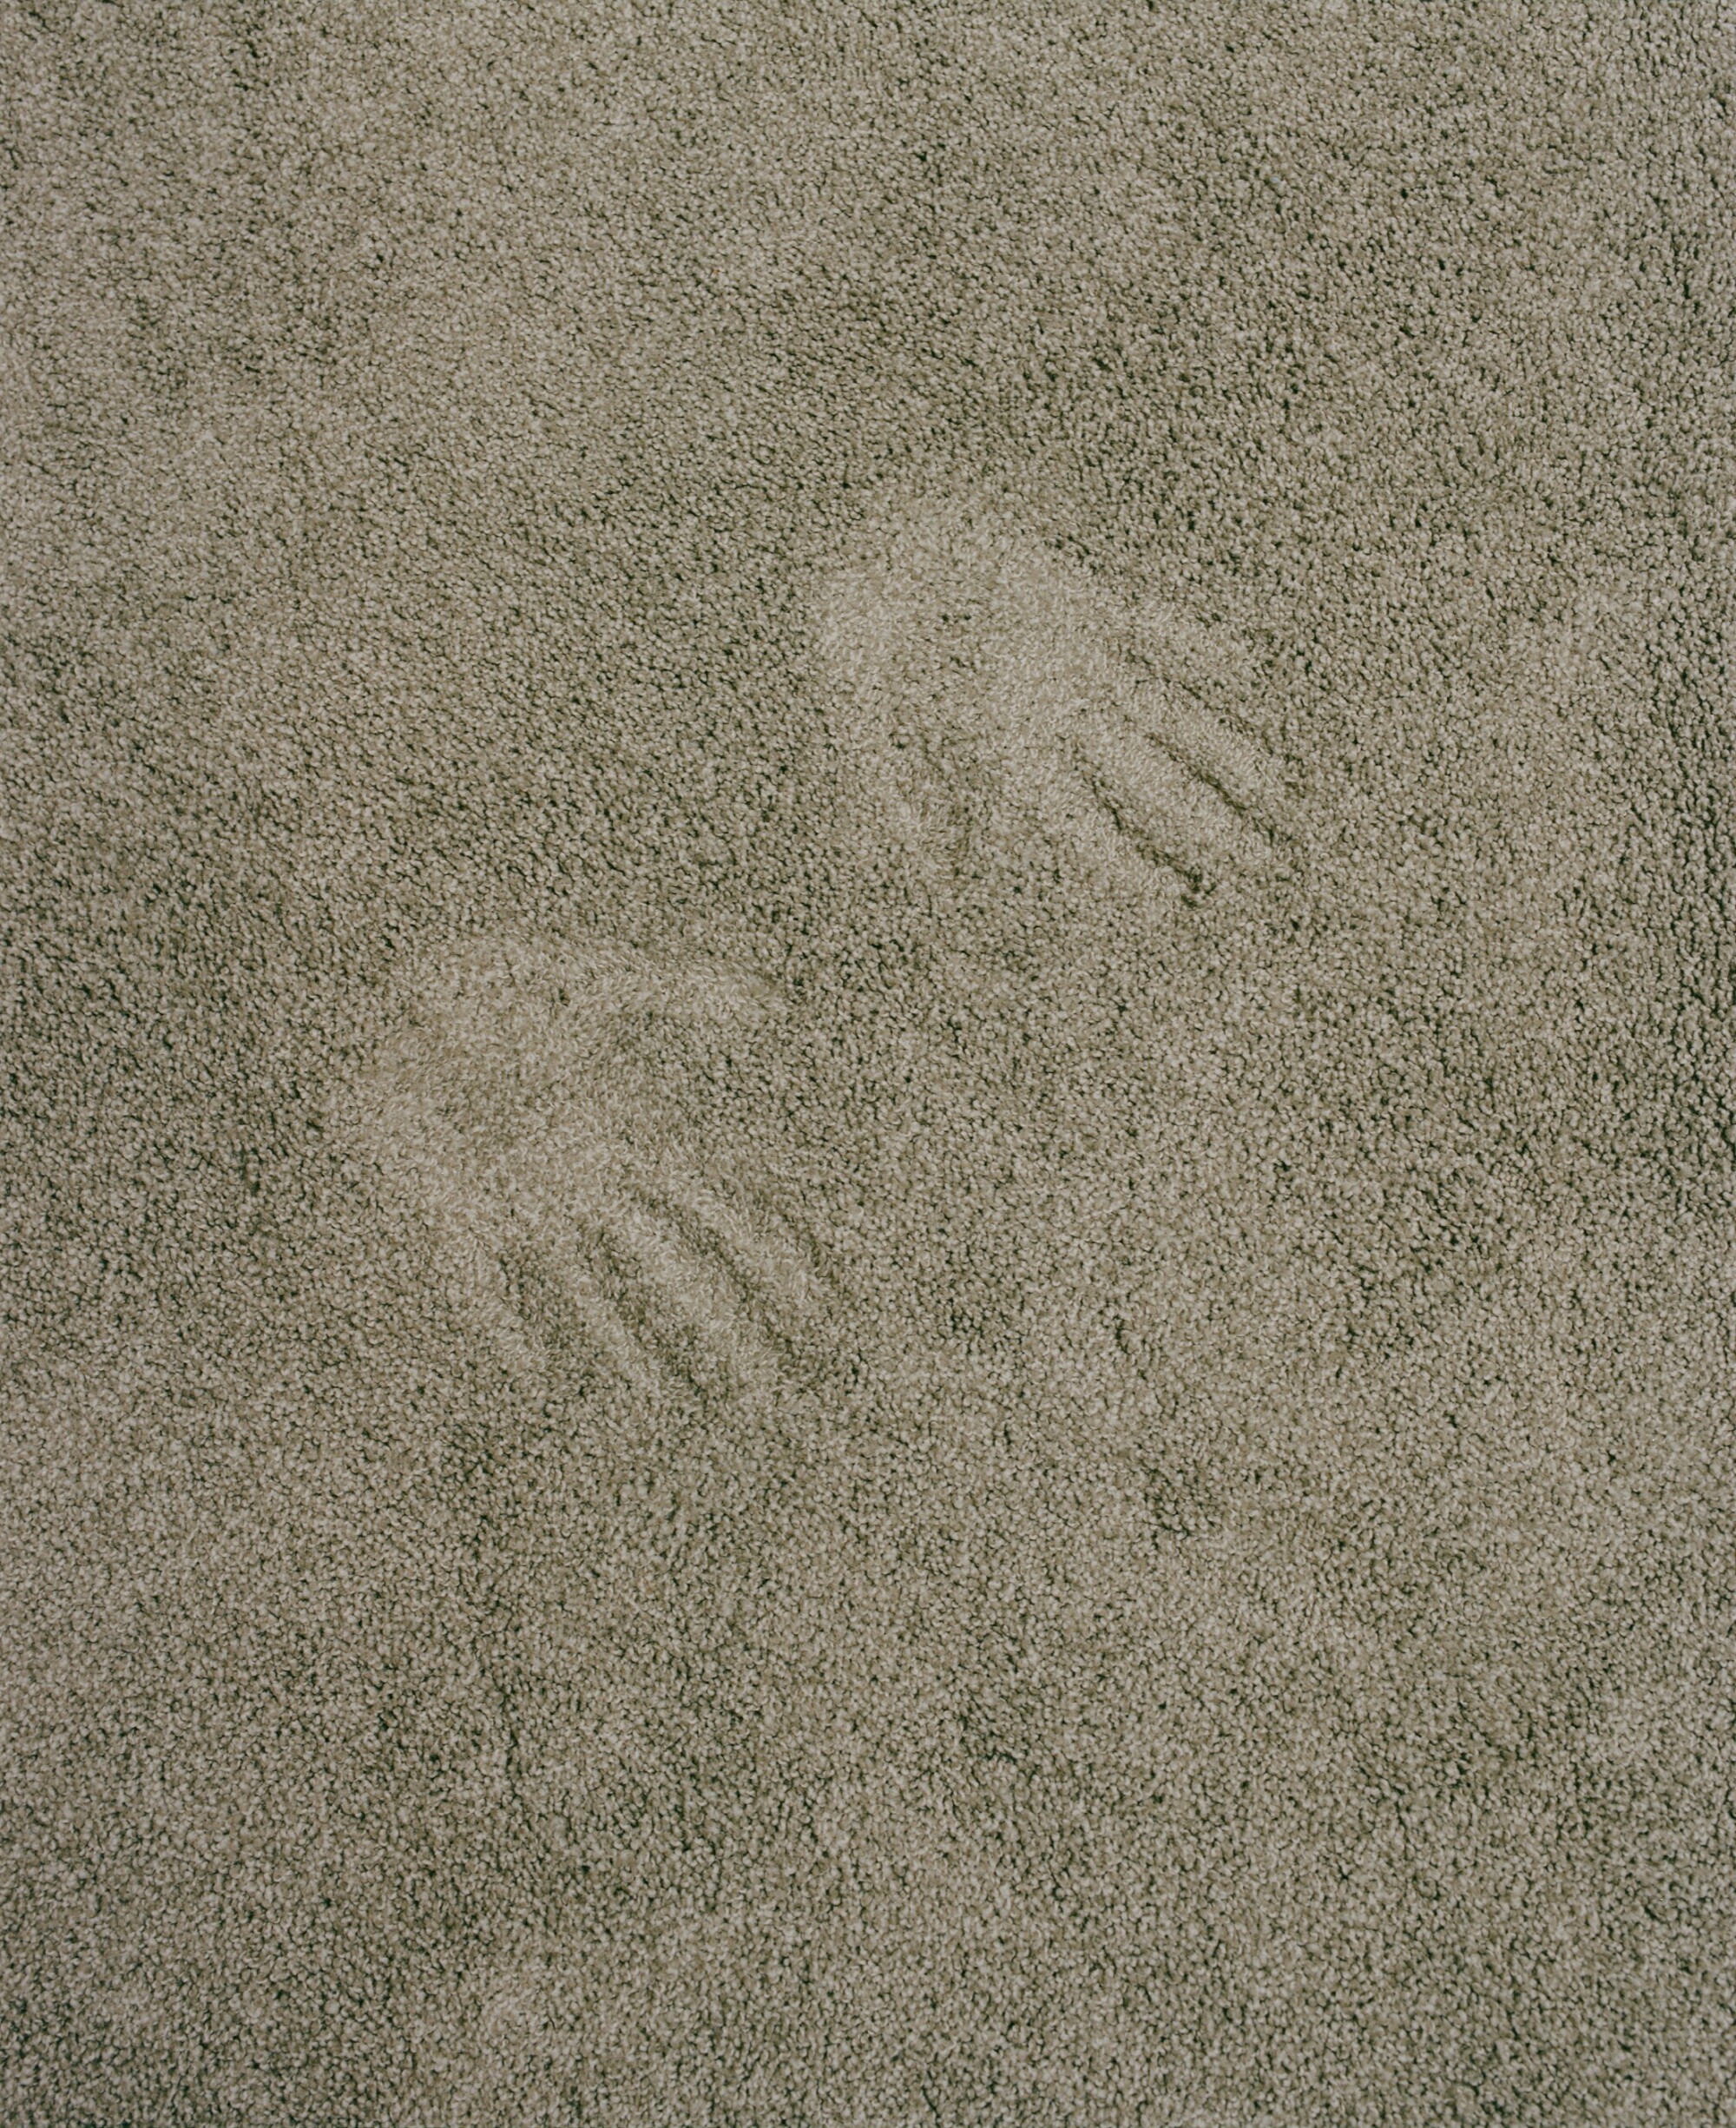 Detail photo of a drab, taupe carpet with two hand prints